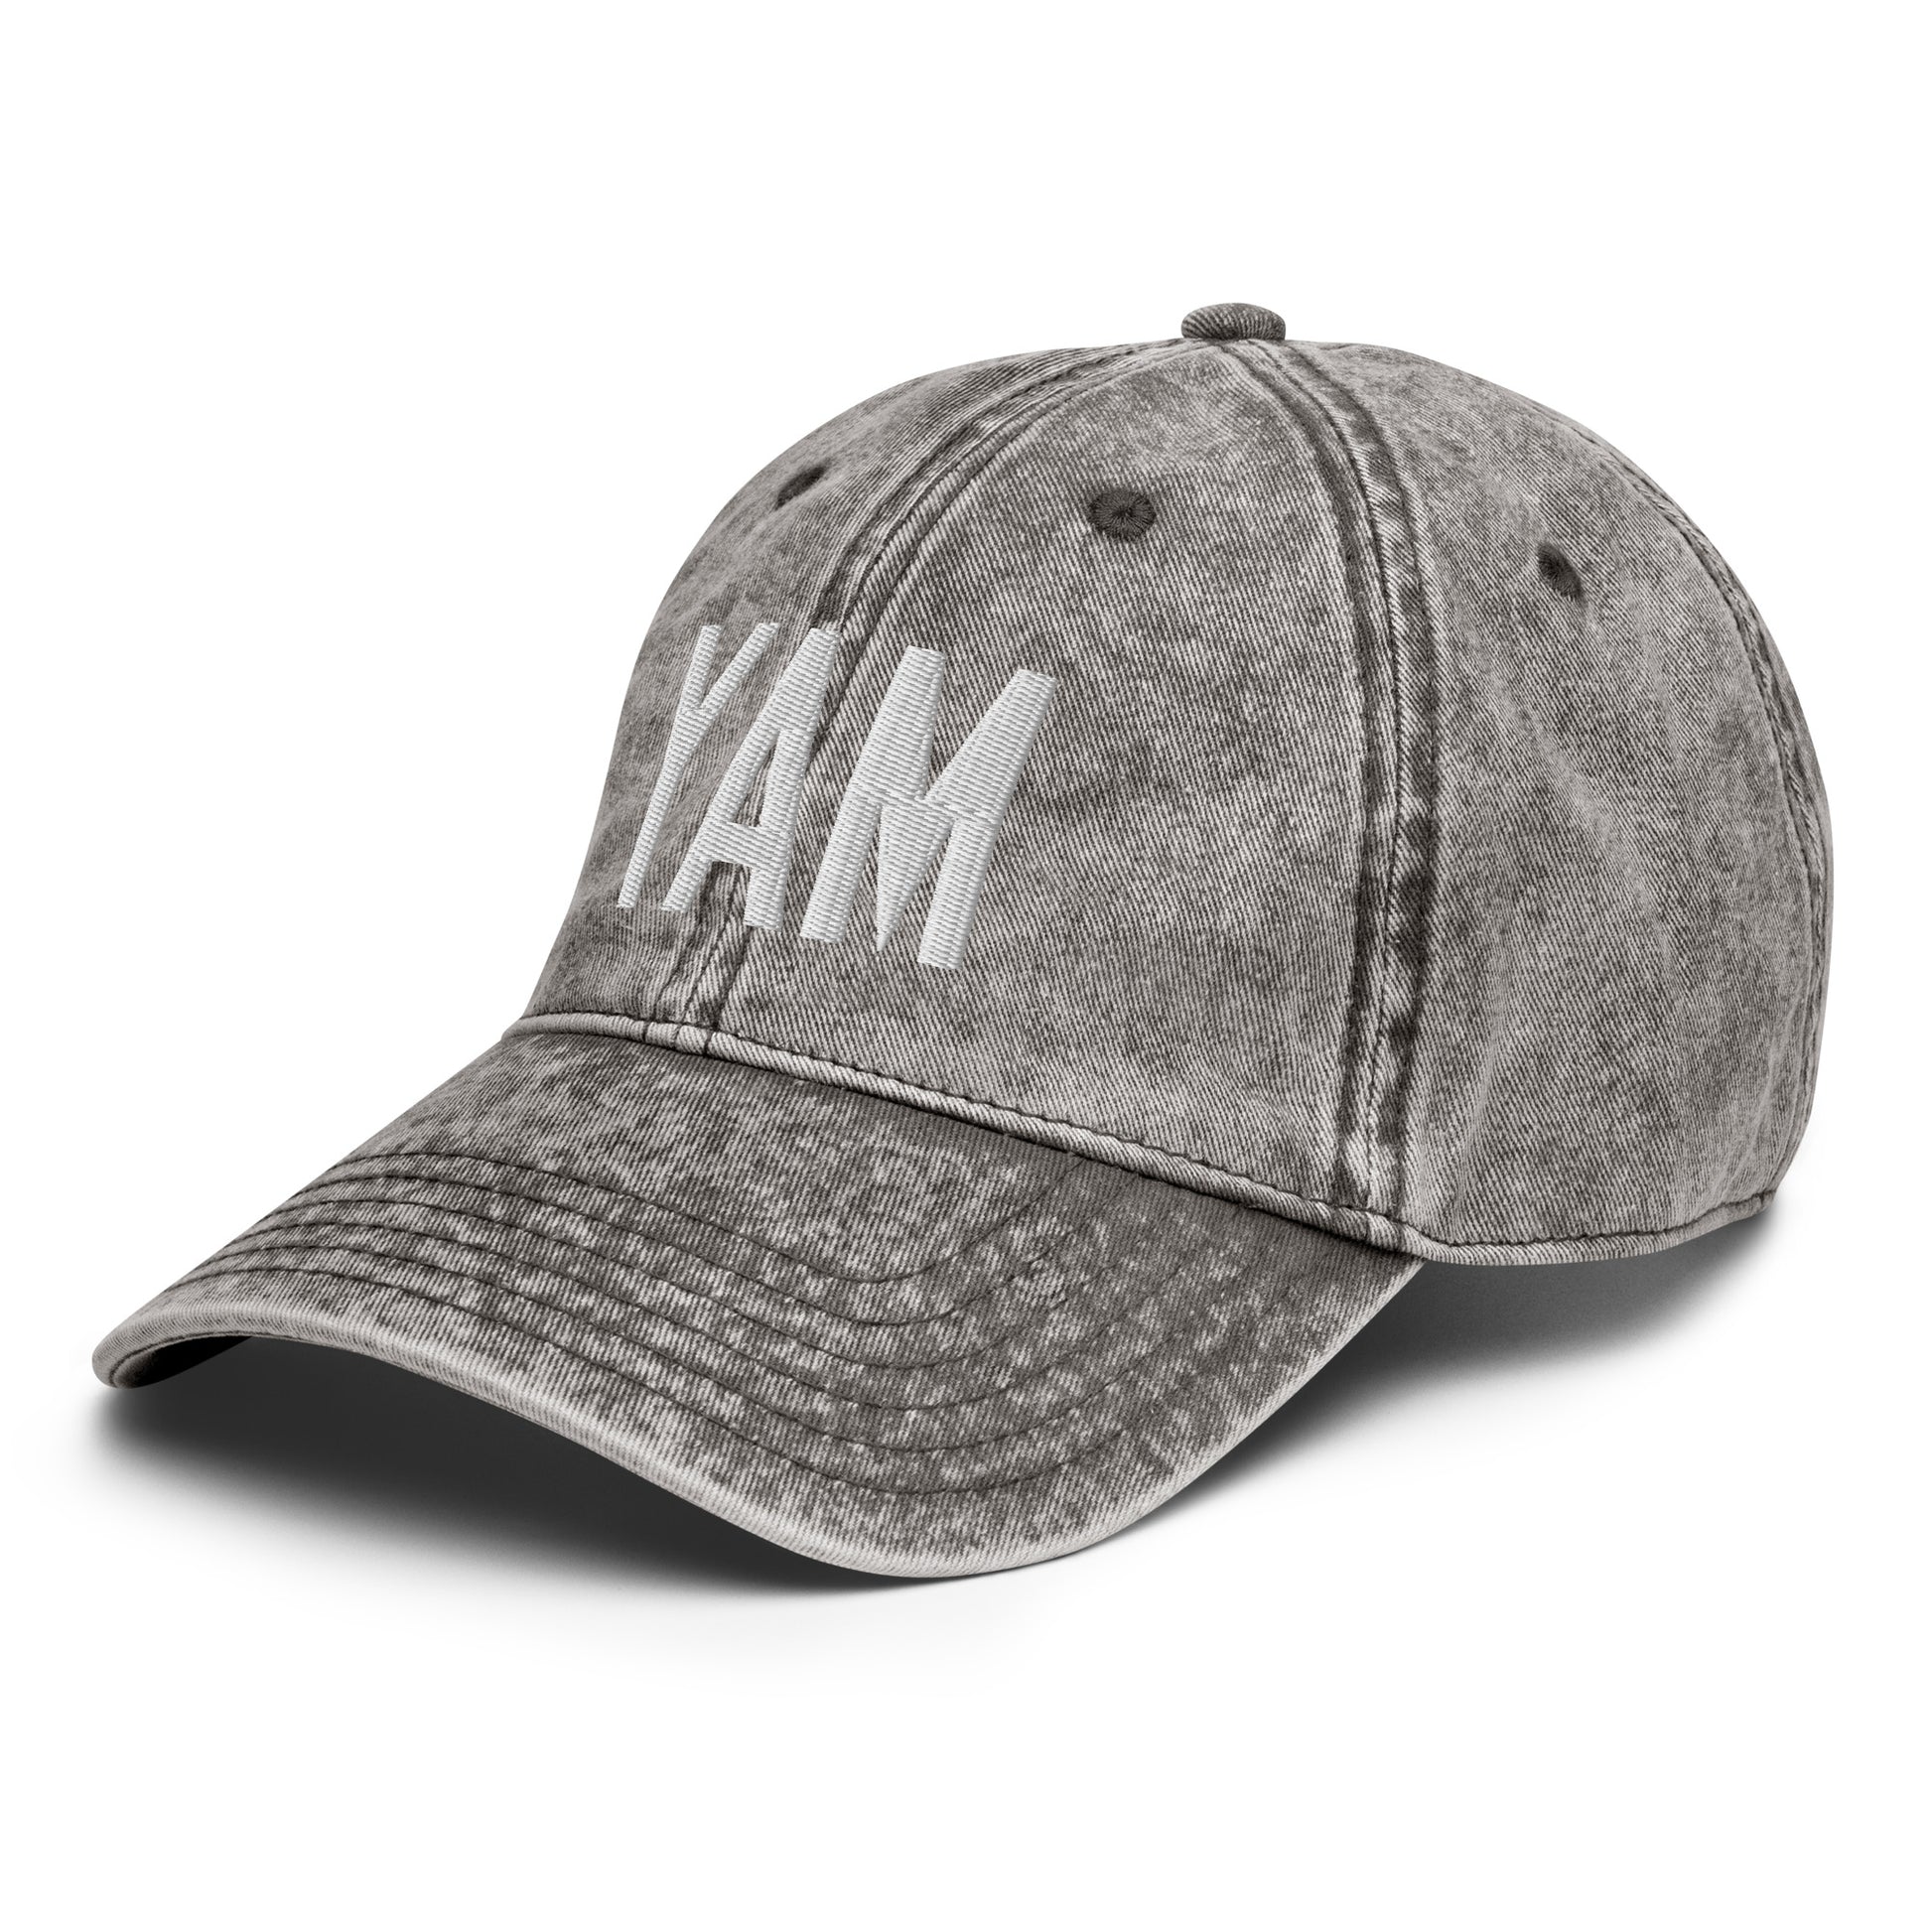 Airport Code Twill Cap - White • YAM Sault-Ste-Marie • YHM Designs - Image 29